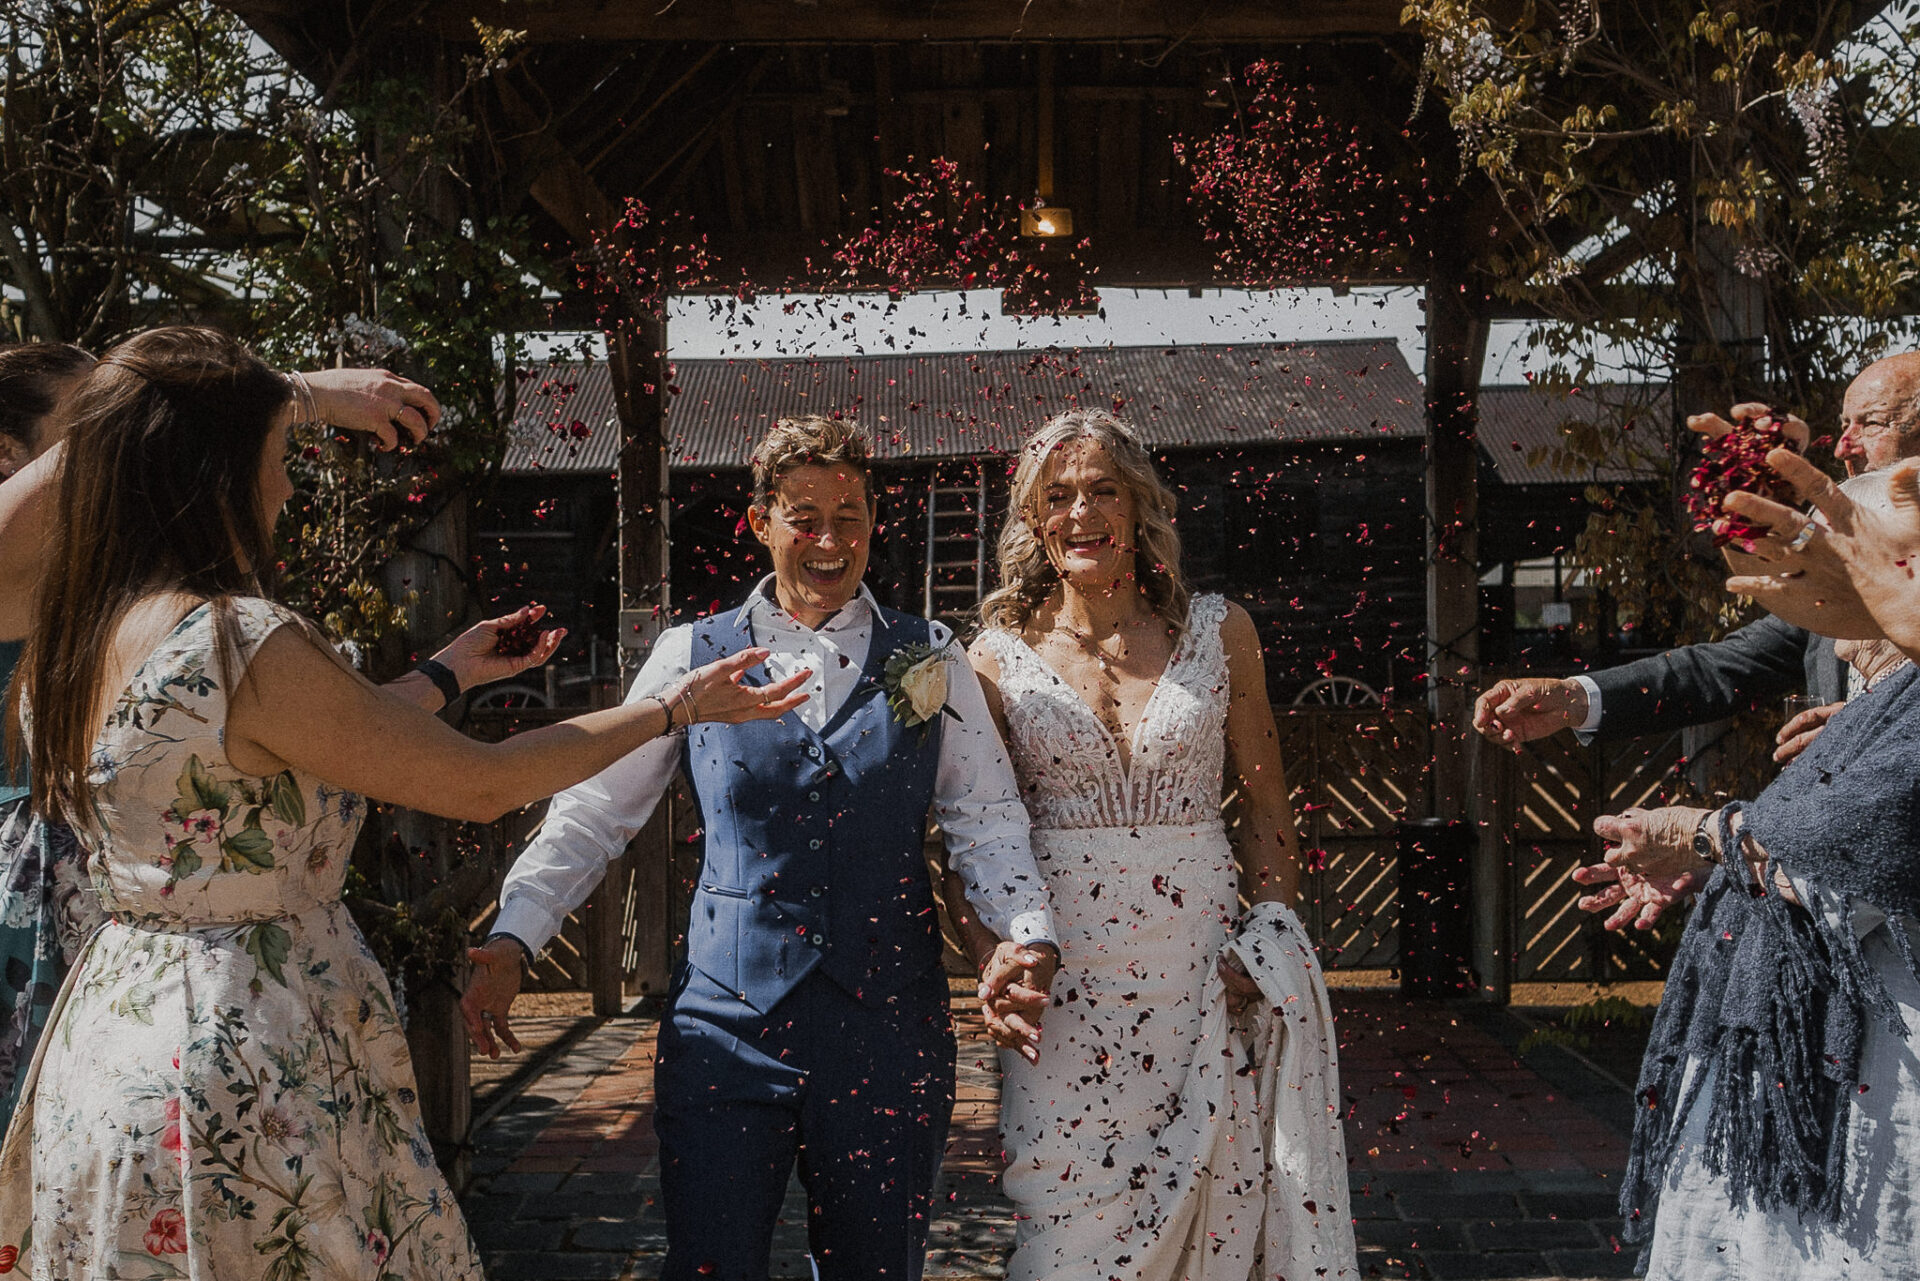 A couple celebrates their wedding with confetti-filled photographs.